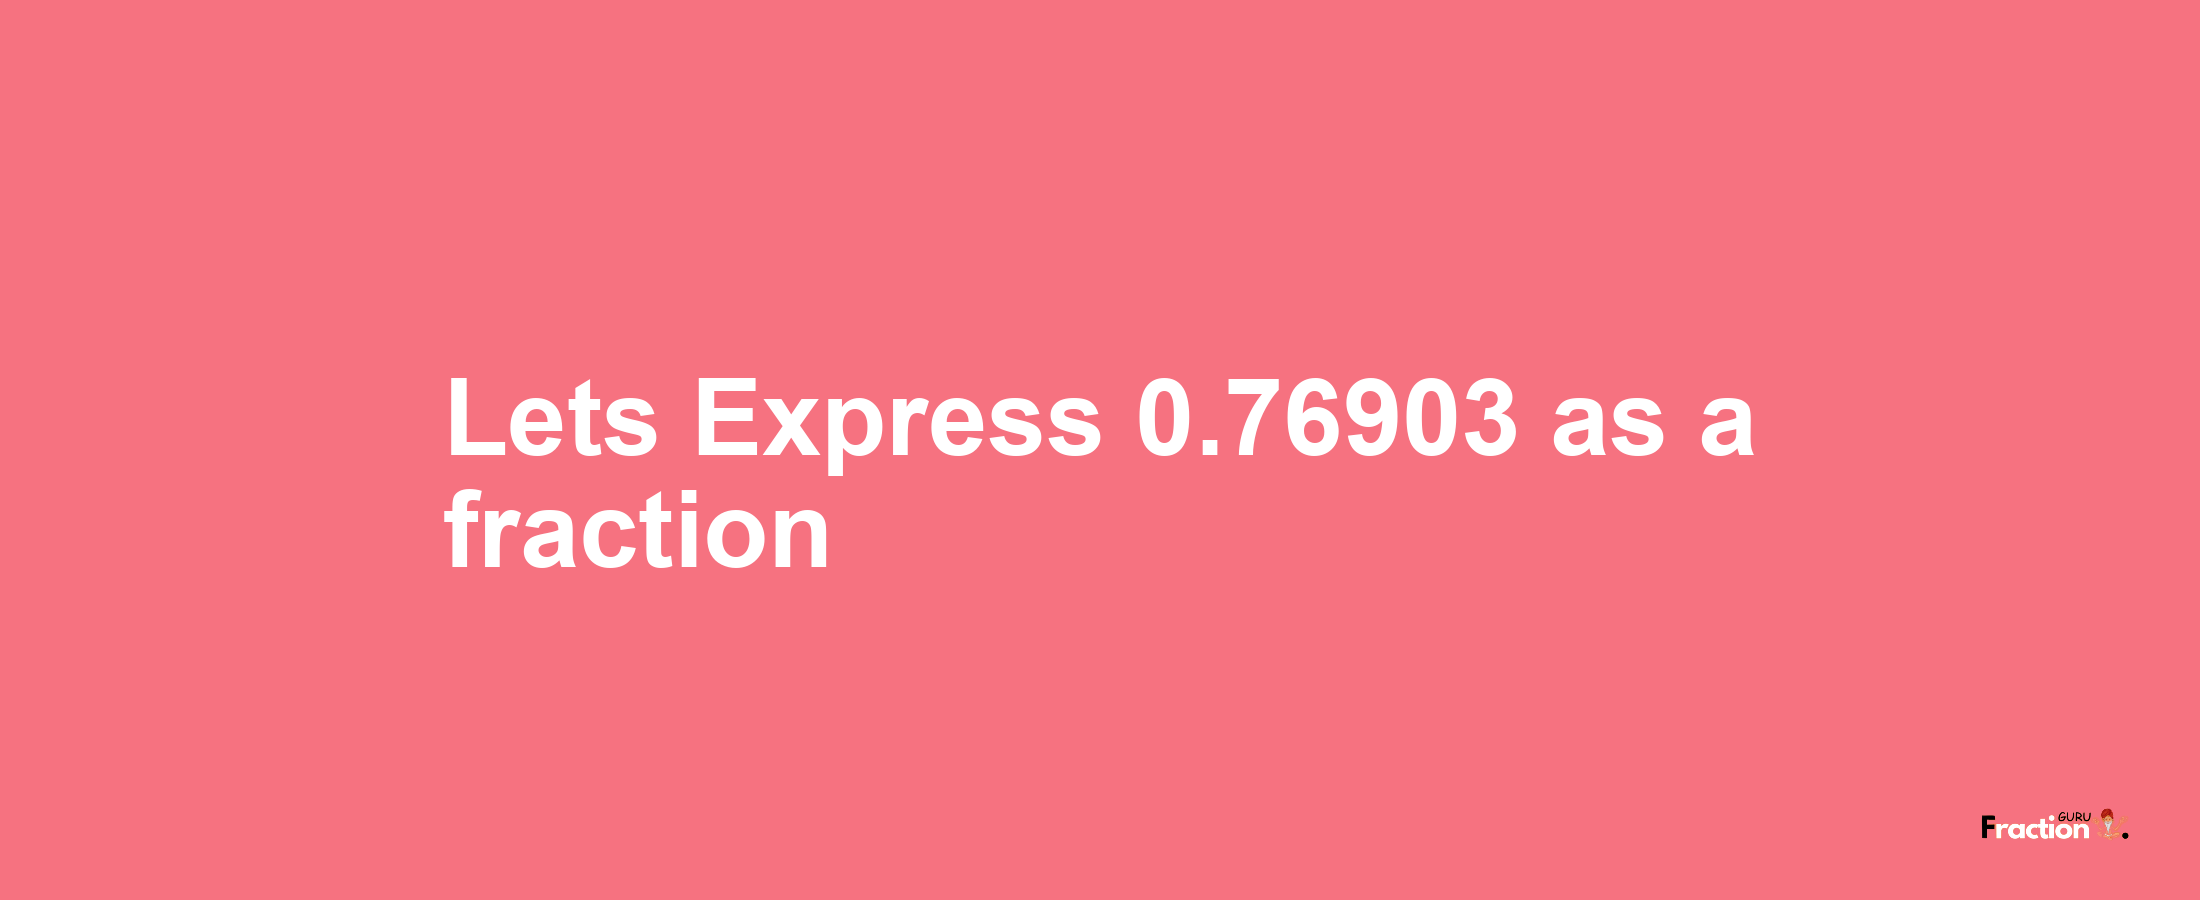 Lets Express 0.76903 as afraction